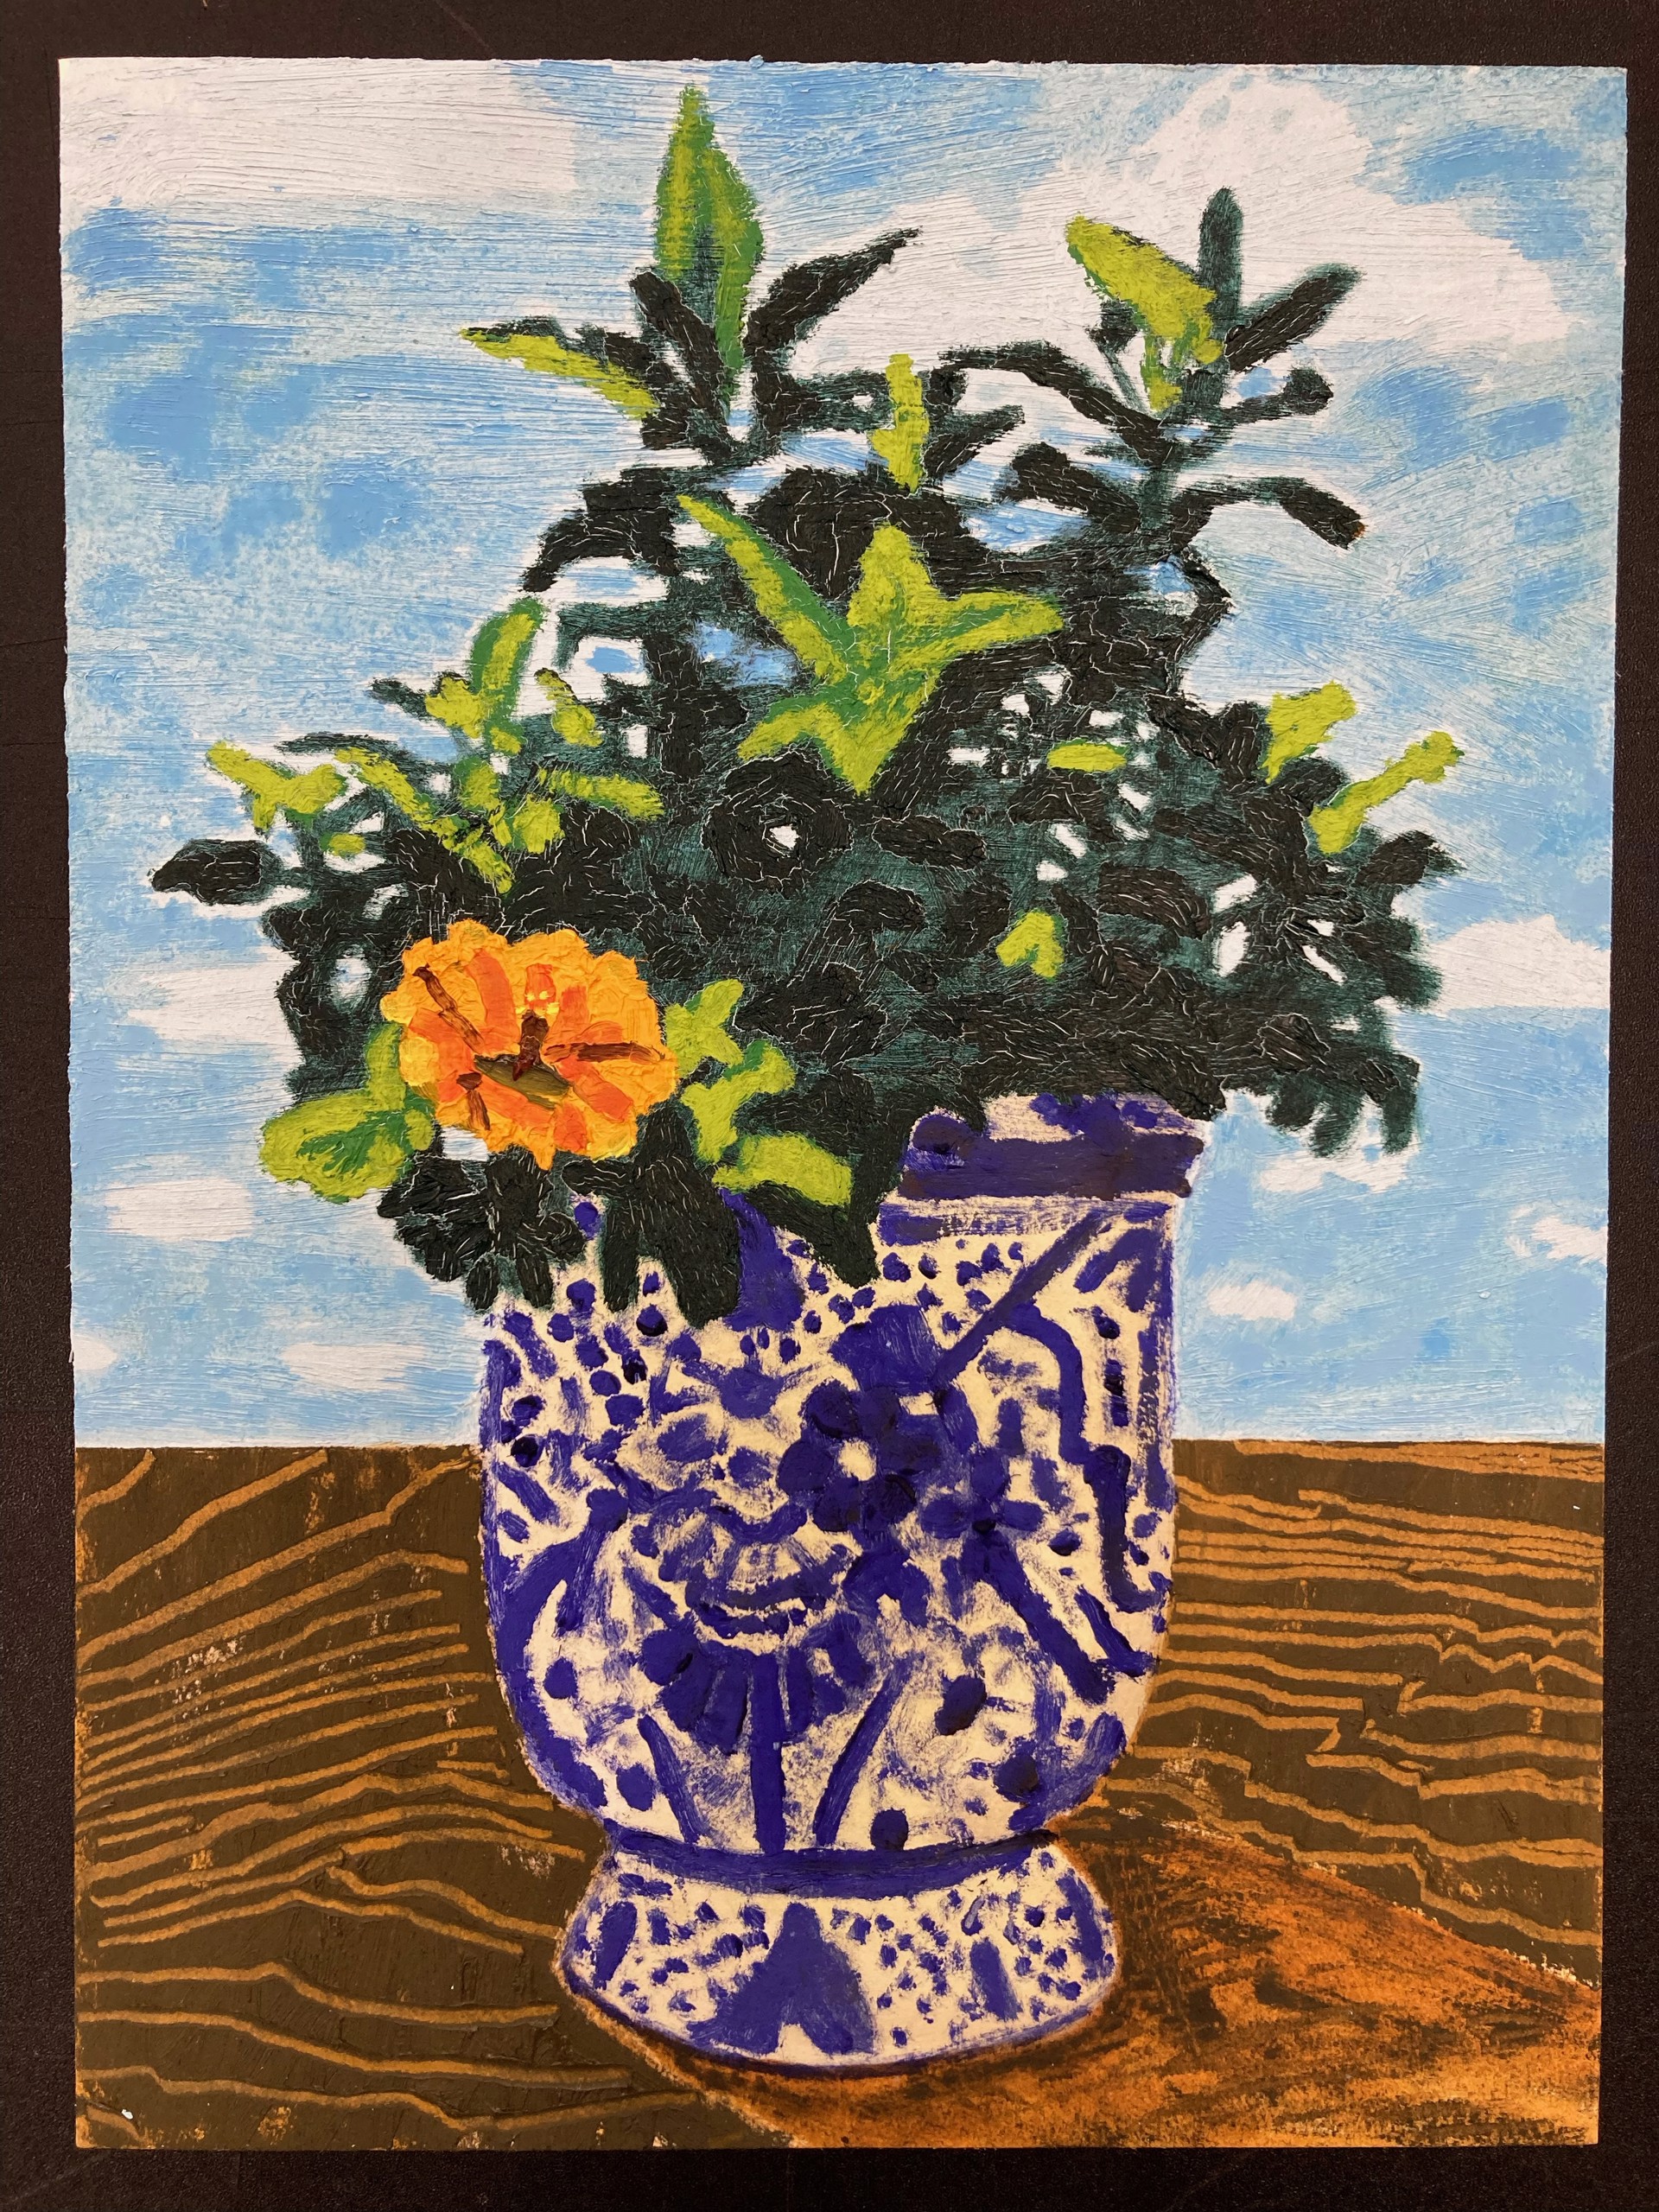 Hibiscus in Talavera #2 (study) by Bradley Kerl